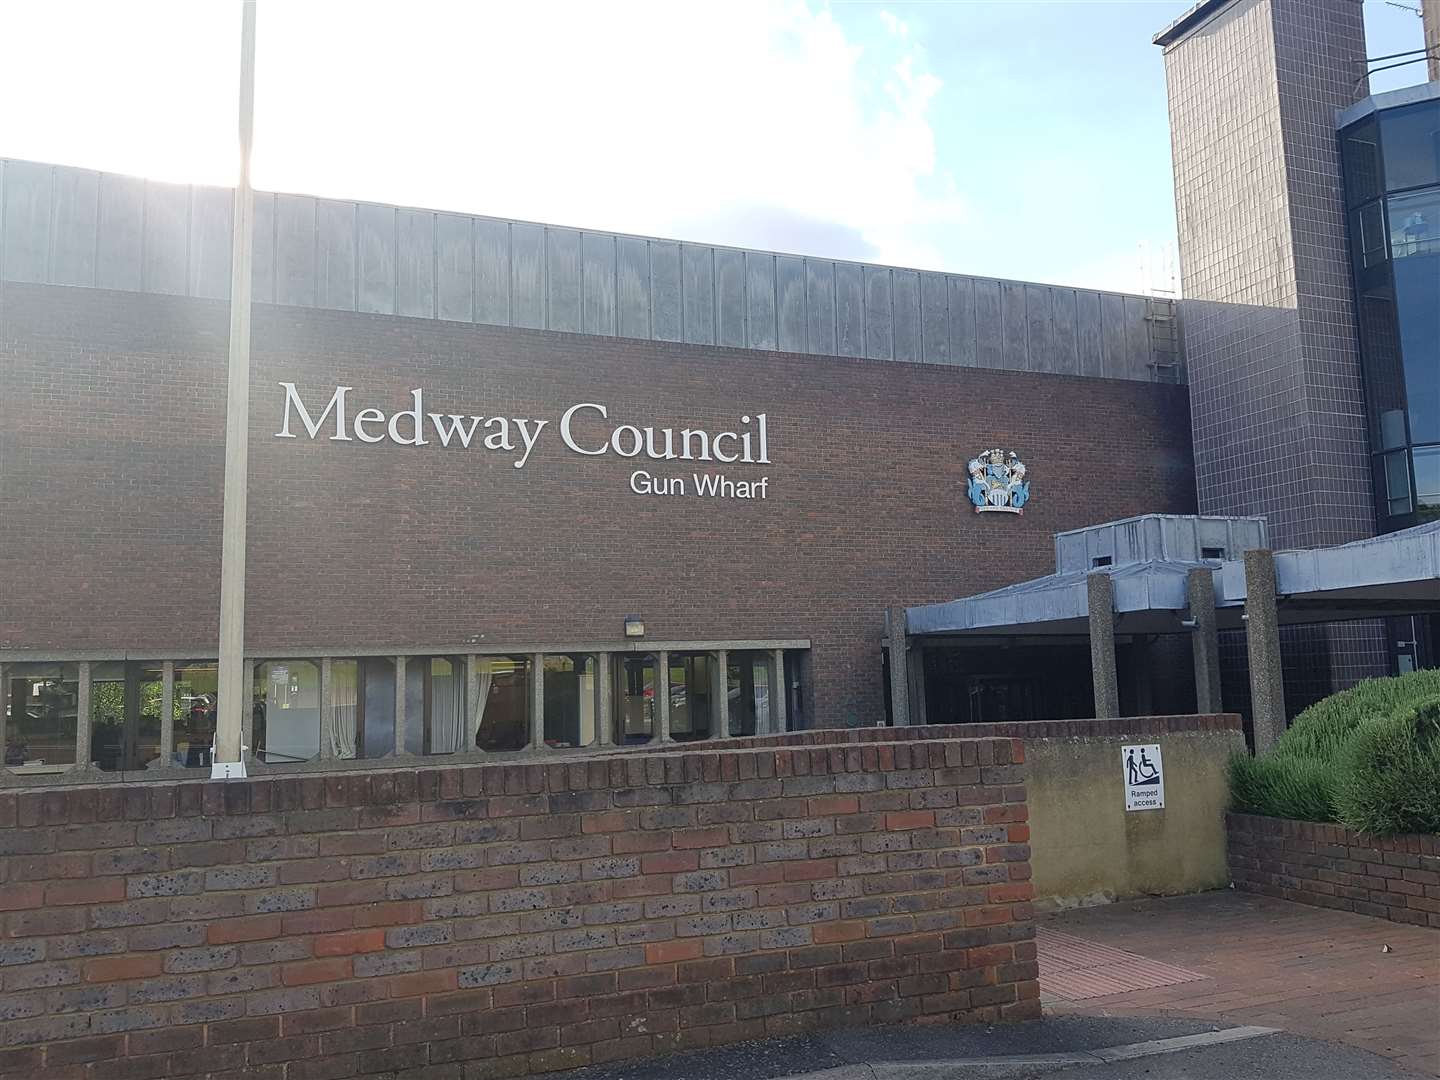 The application will be reviewed by the Medway and Gravesham Council Licensing Partnership